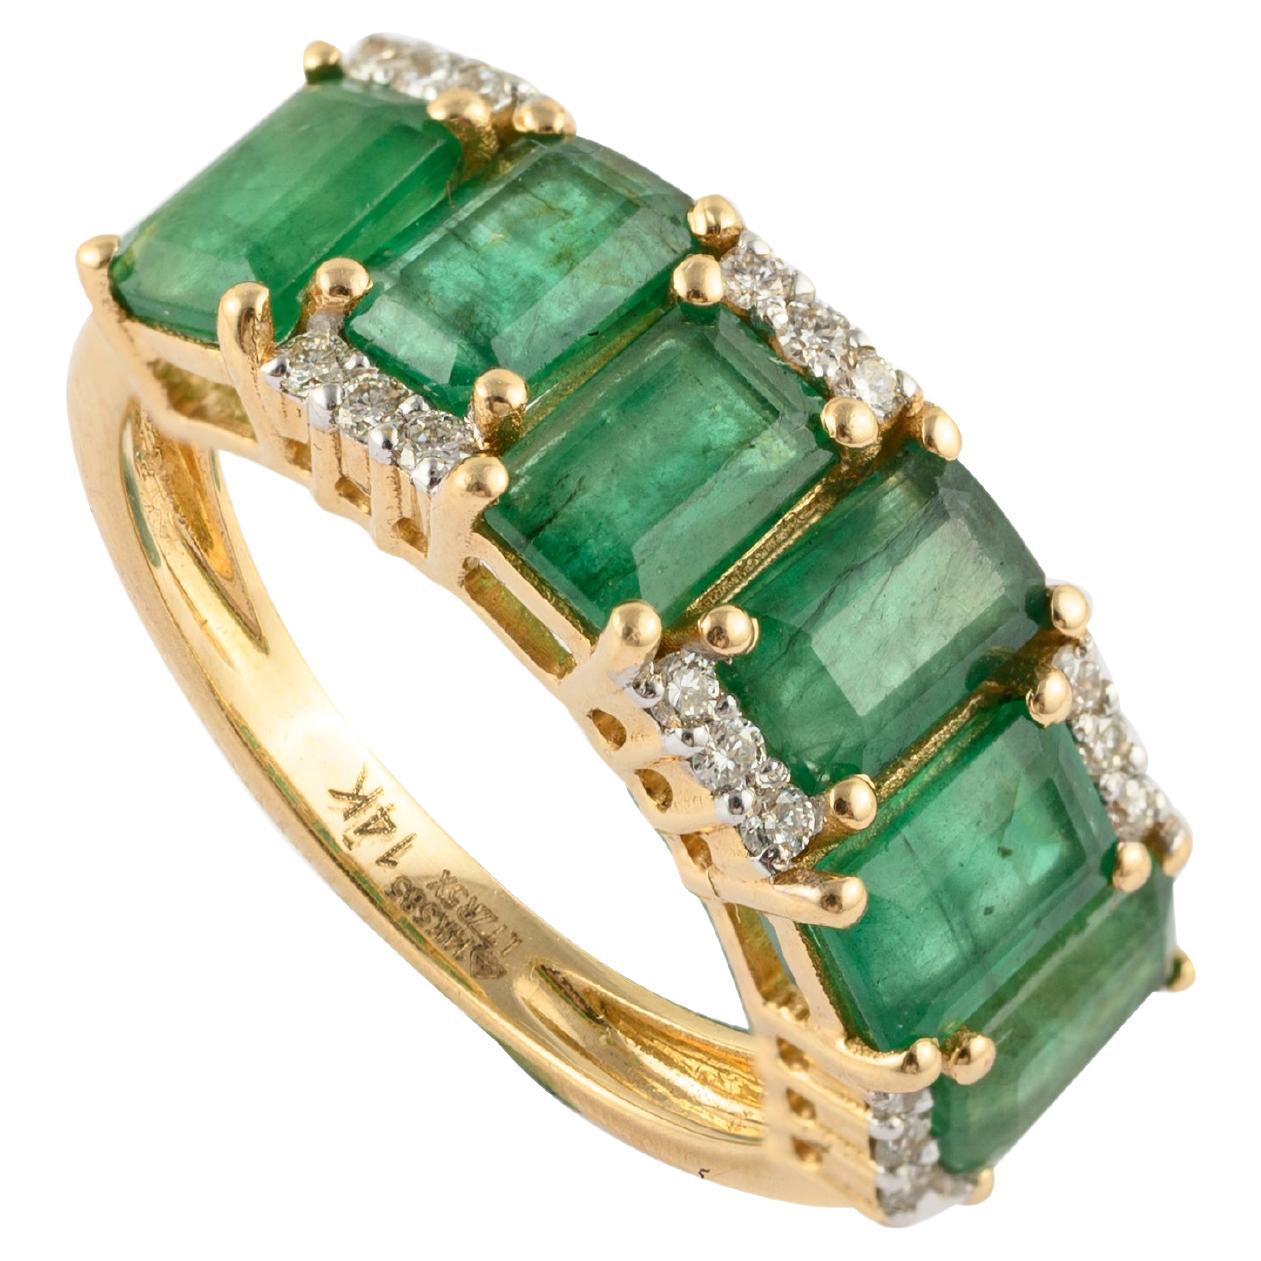 For Sale:  Natural Diamond & 3.13 ct Emerald Wedding Band Ring Set in 14K Solid Yellow Gold